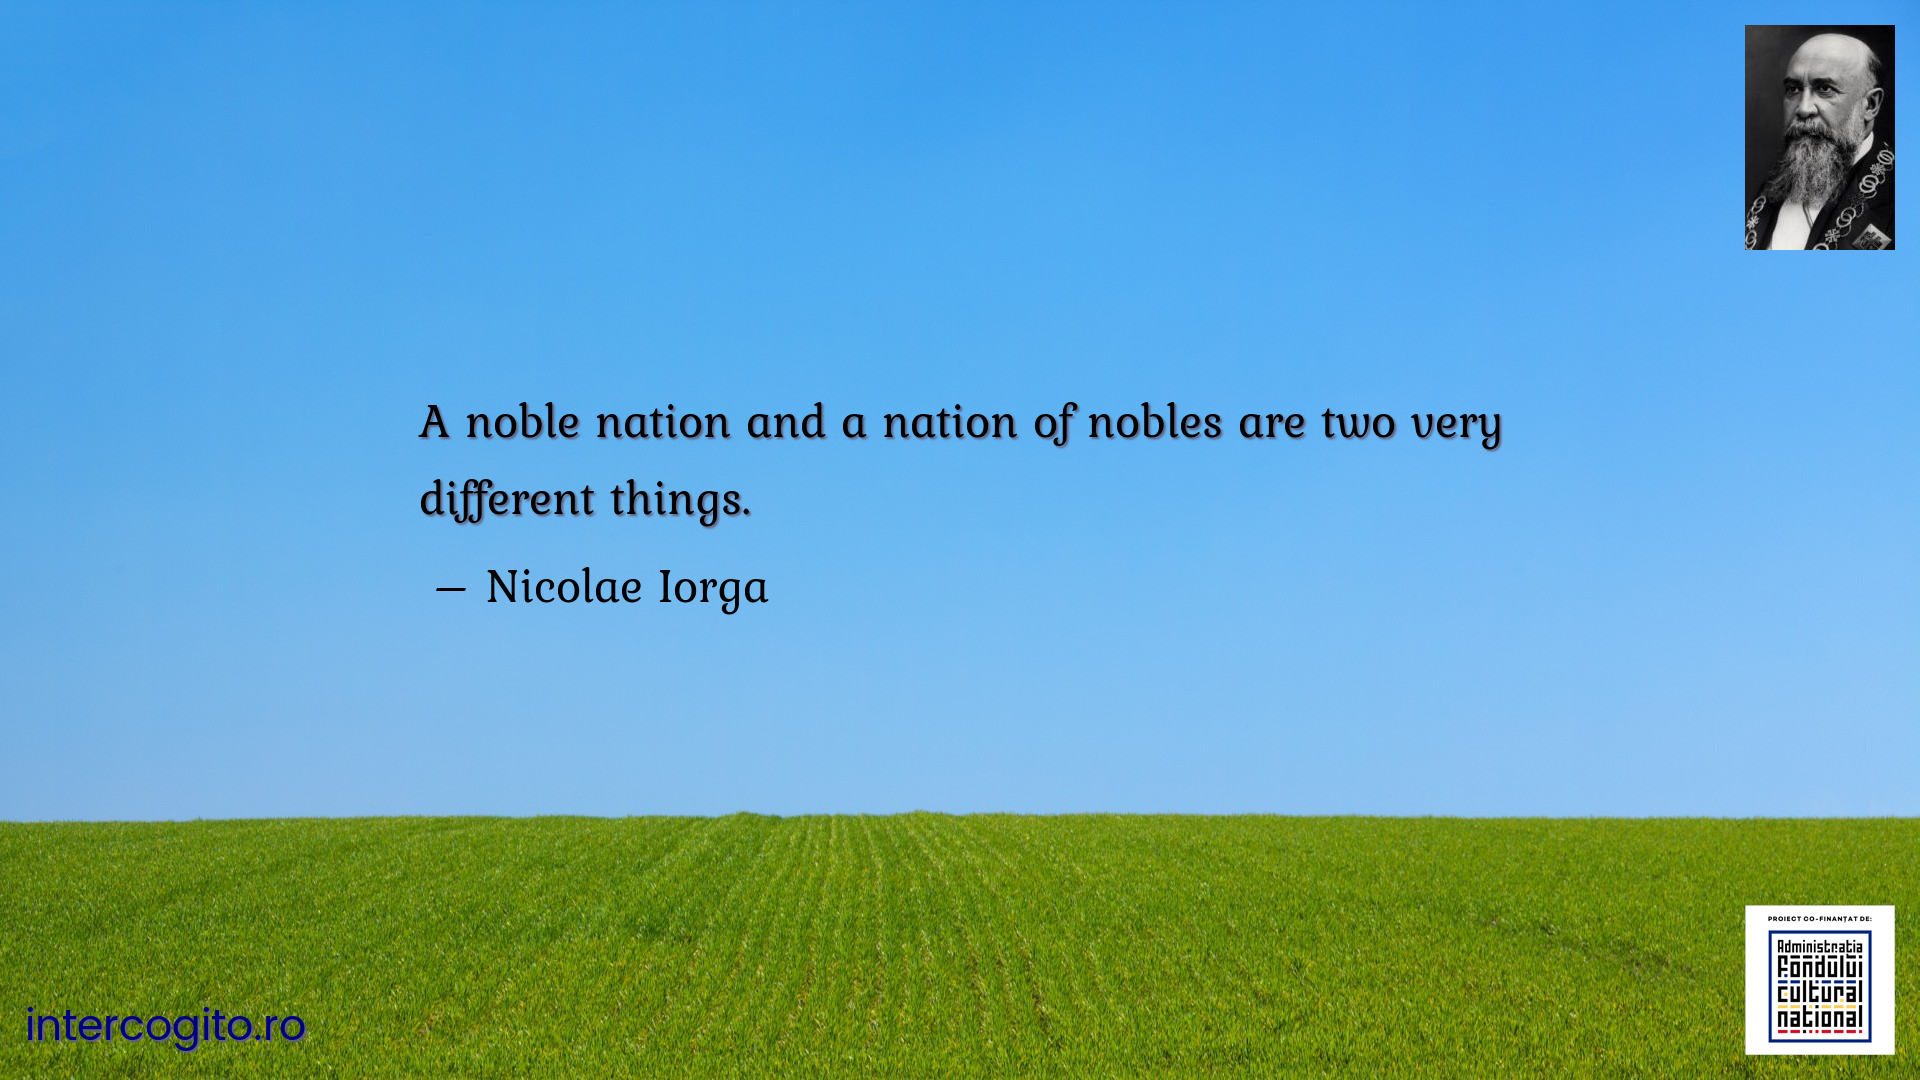 A noble nation and a nation of nobles are two very different things.